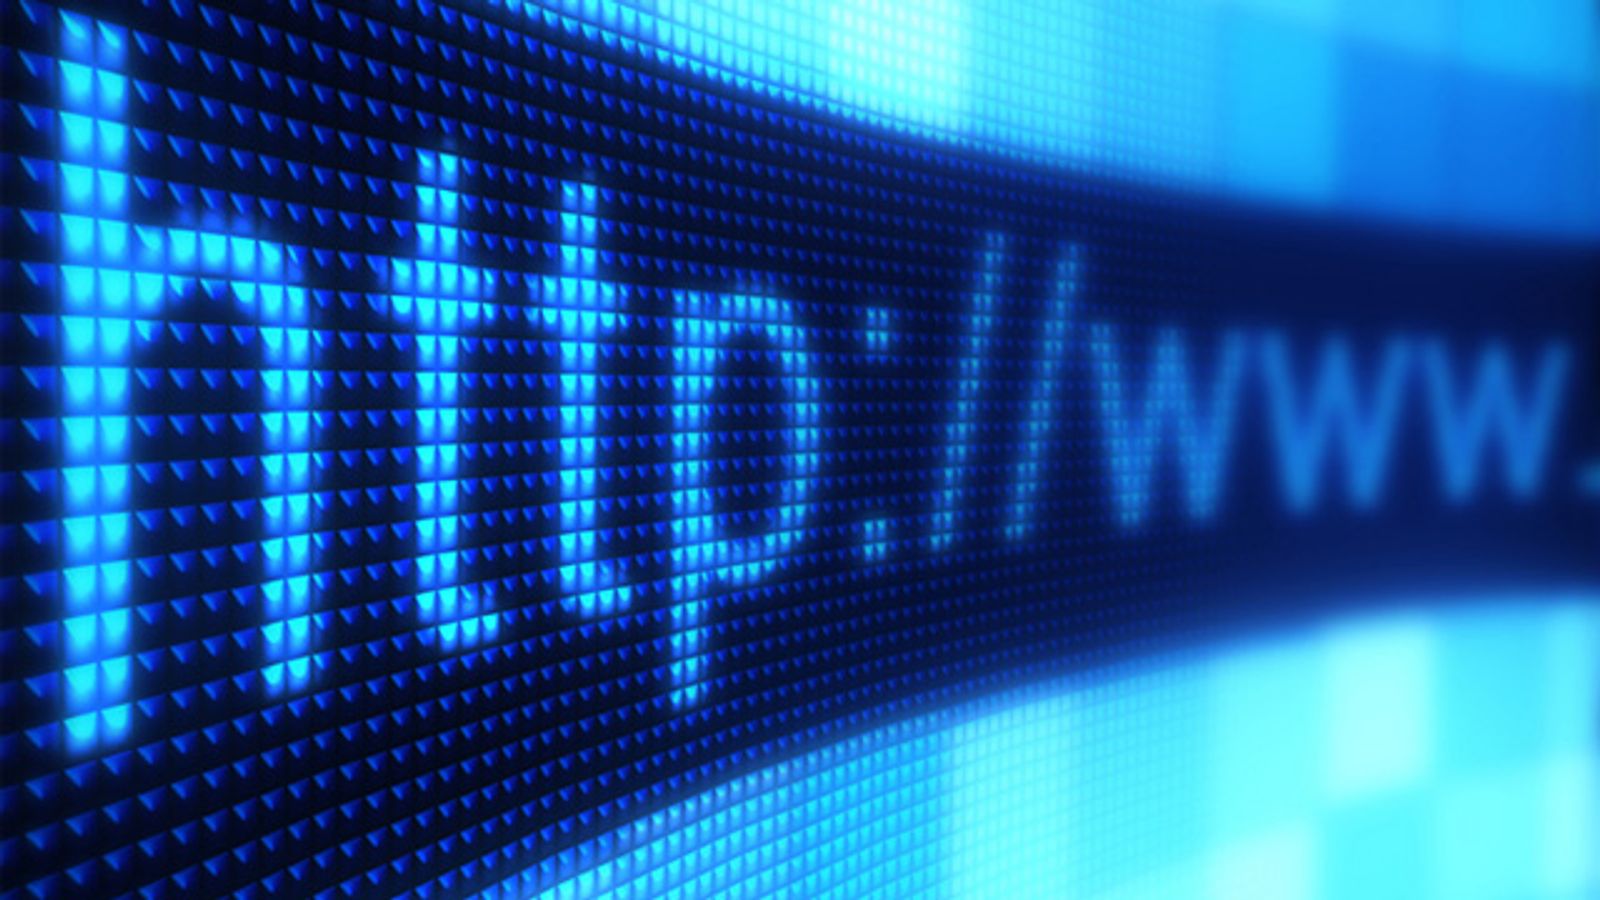 Domain Name Fee Challenge Turned Down by U.S. High Court